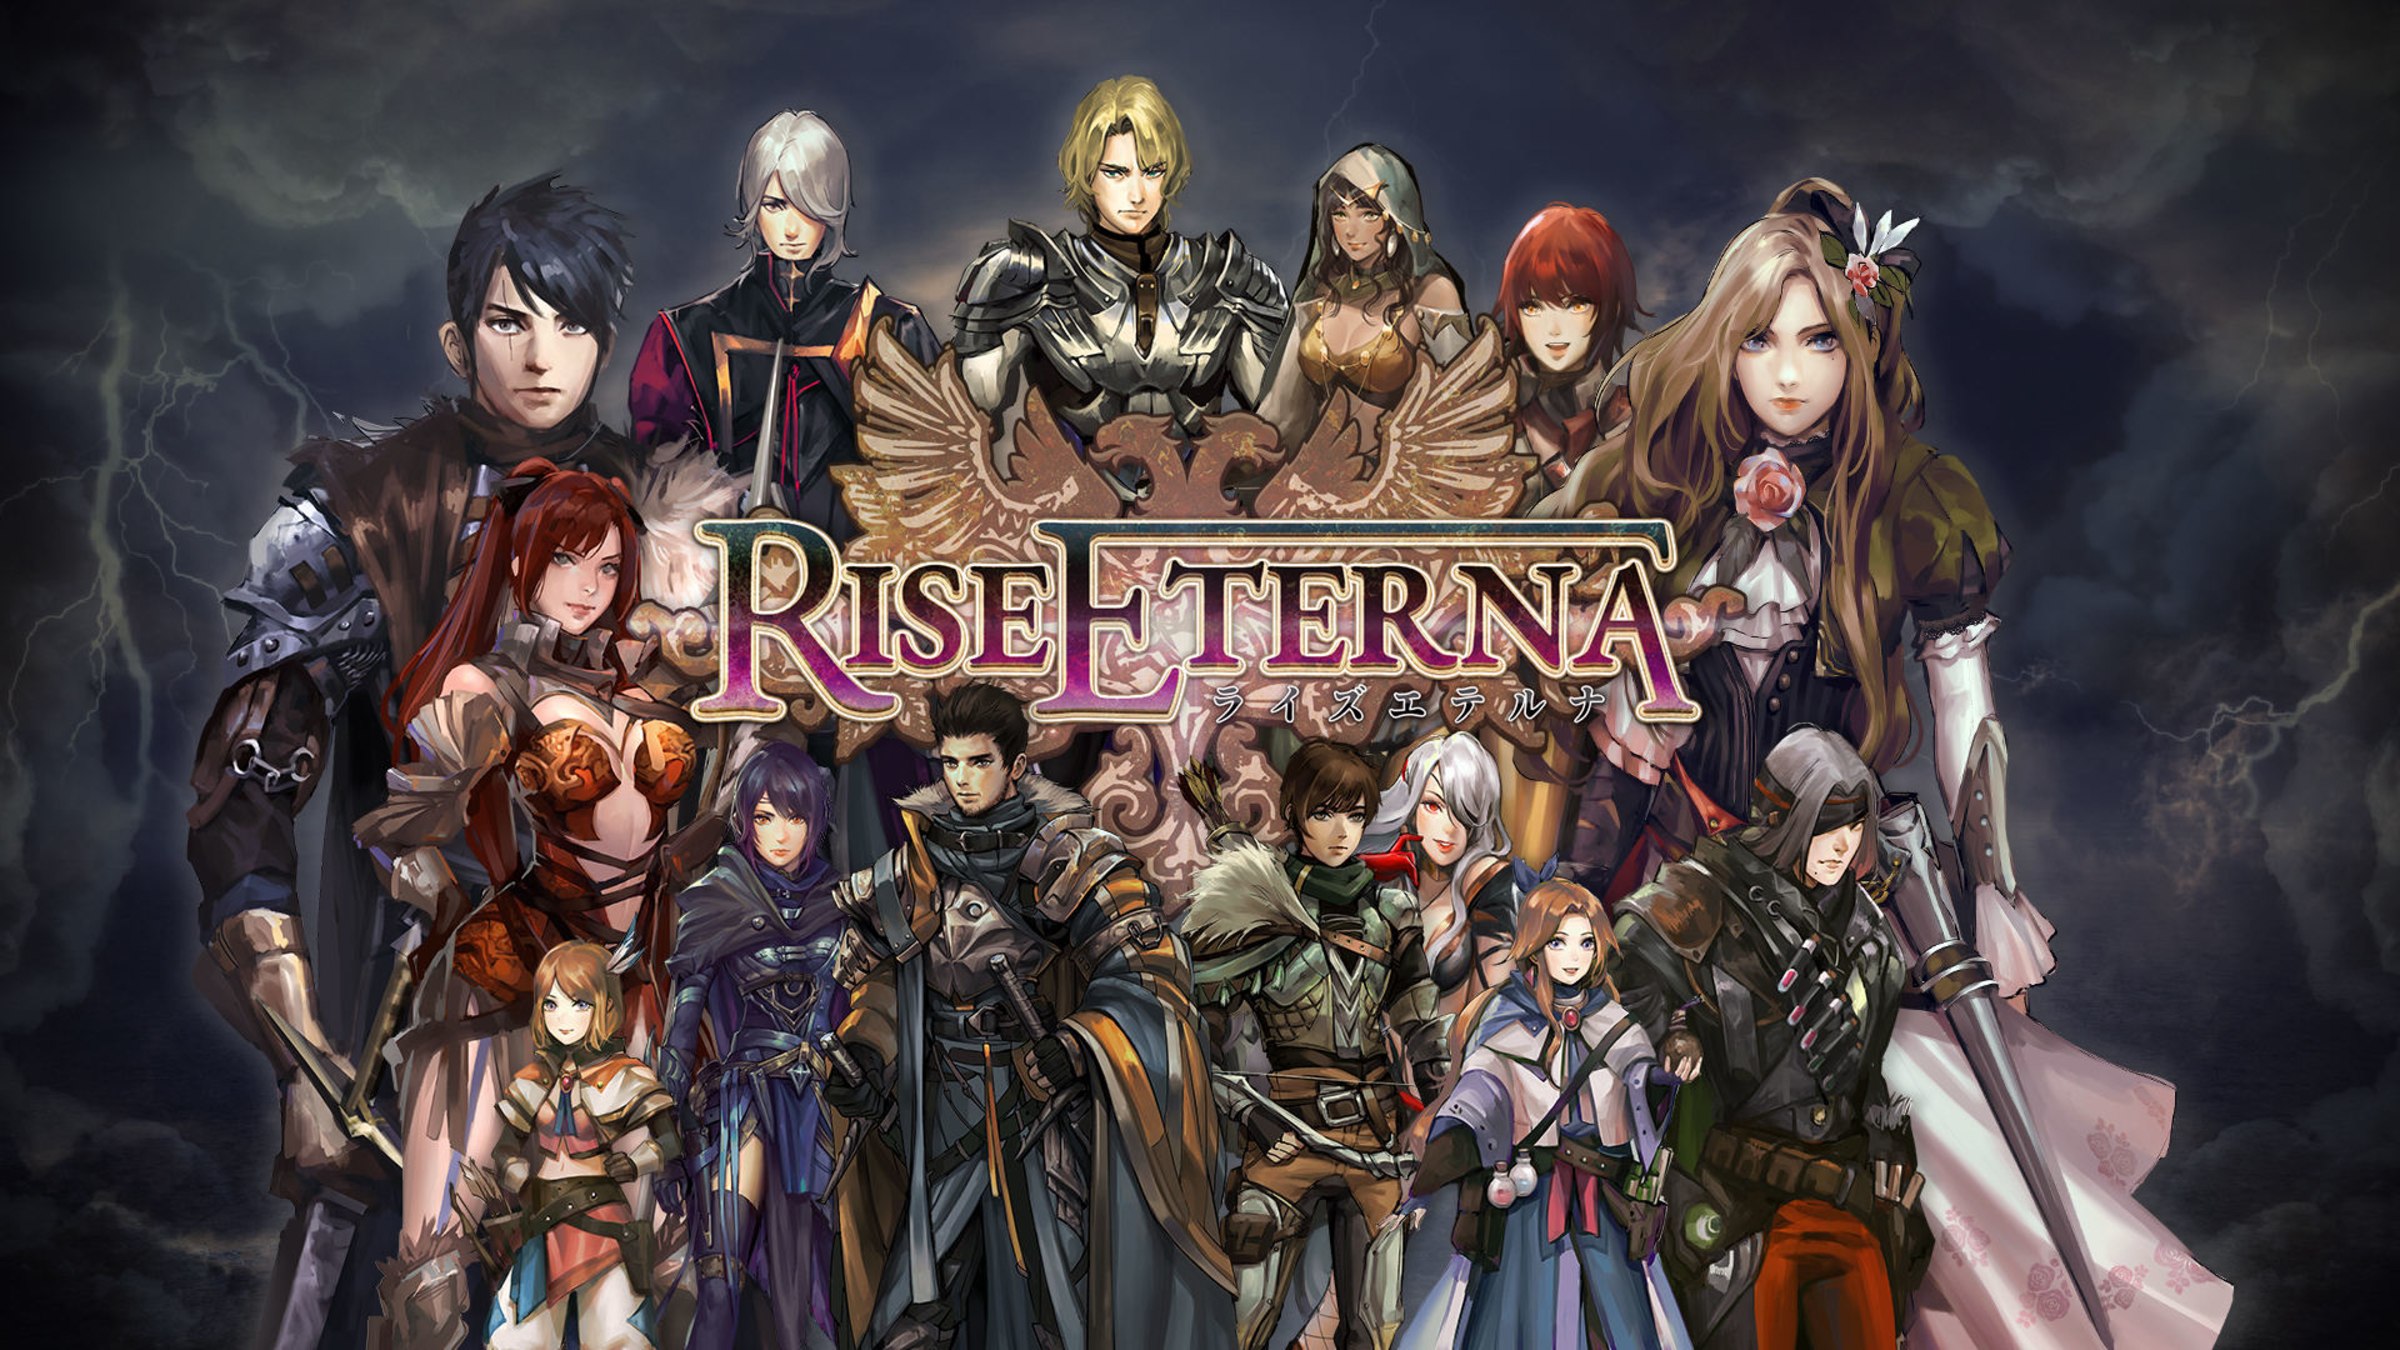 Rise Eterna for Nintendo Switch Nintendo Official Site